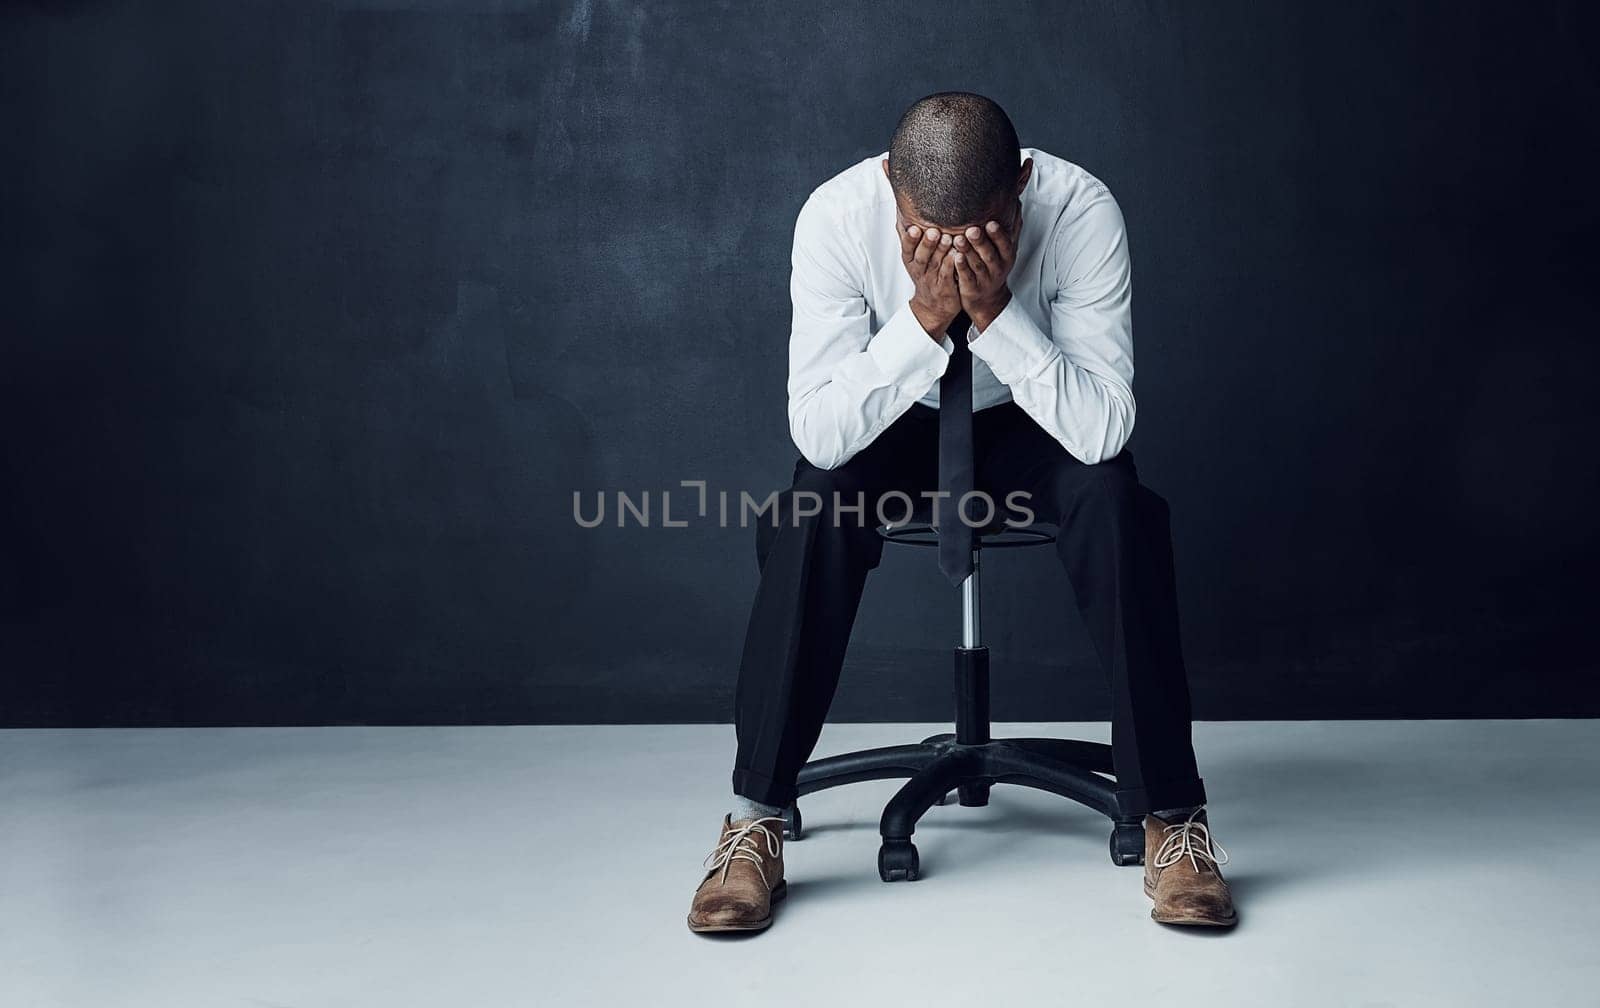 Everyone has battles to face before they see success. Studio shot of a young businessman sitting with his hands covering his face against a dark background